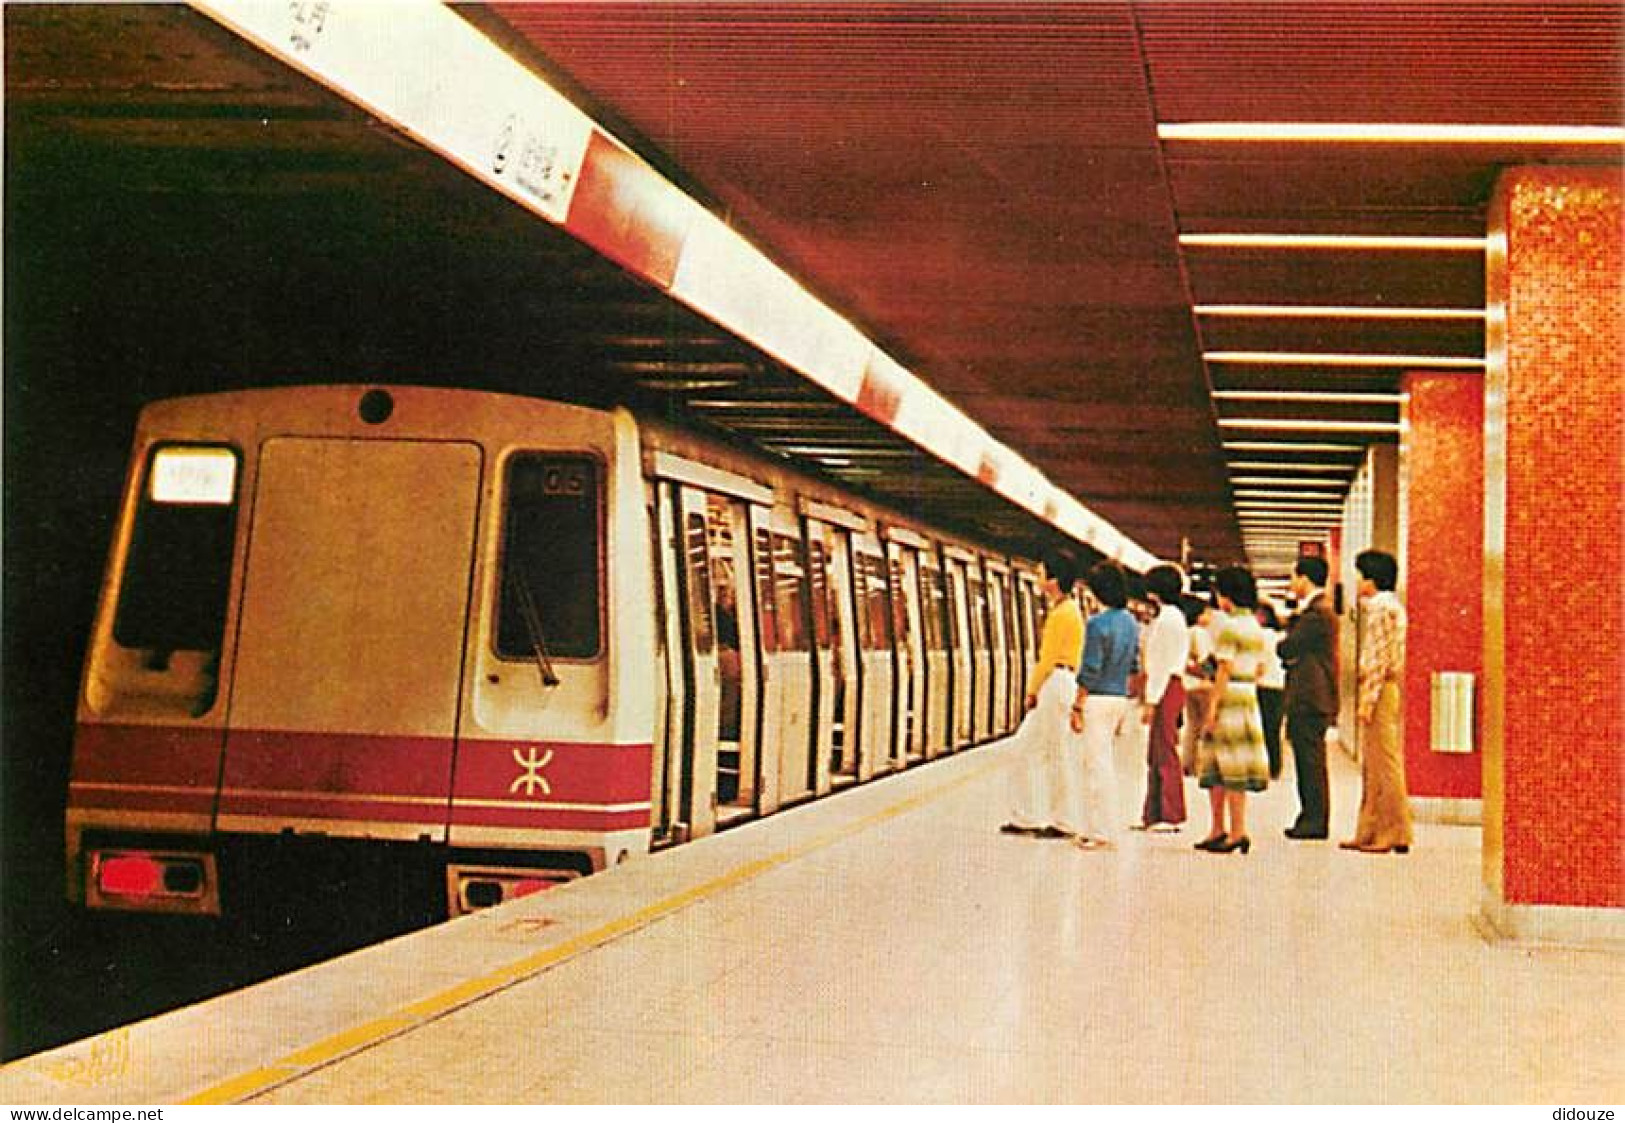 Trains - Métro - Hong Kong - Hong Kong Has Marked Its Entry Into The 1980S With A Significant New Achievement: The Métro - Subway